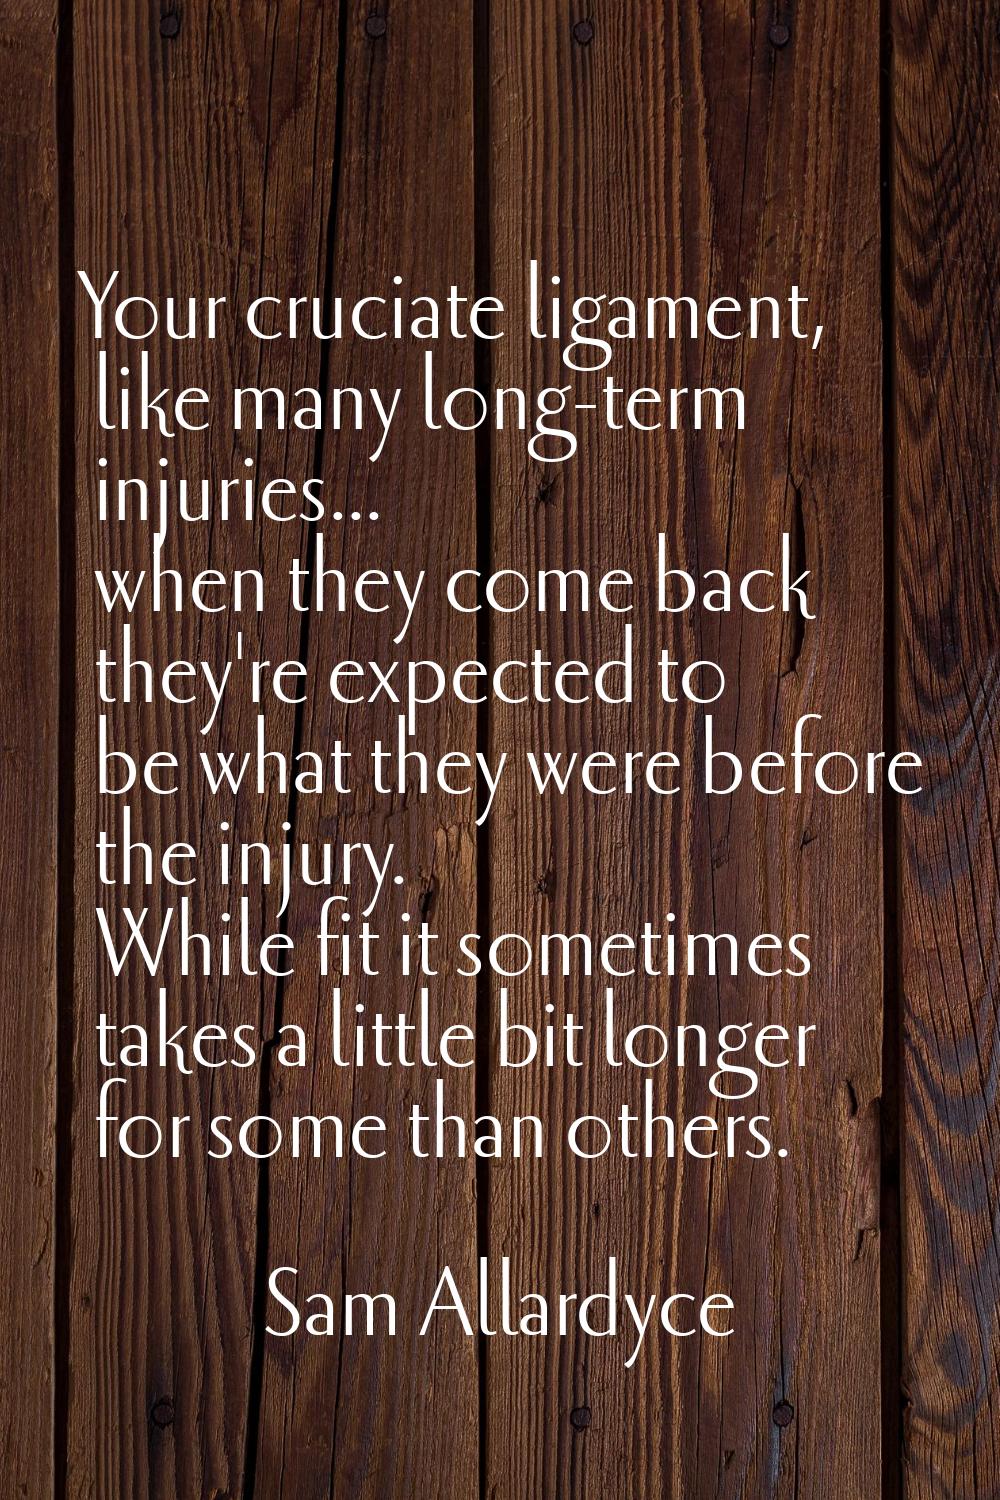 Your cruciate ligament, like many long-term injuries... when they come back they're expected to be 